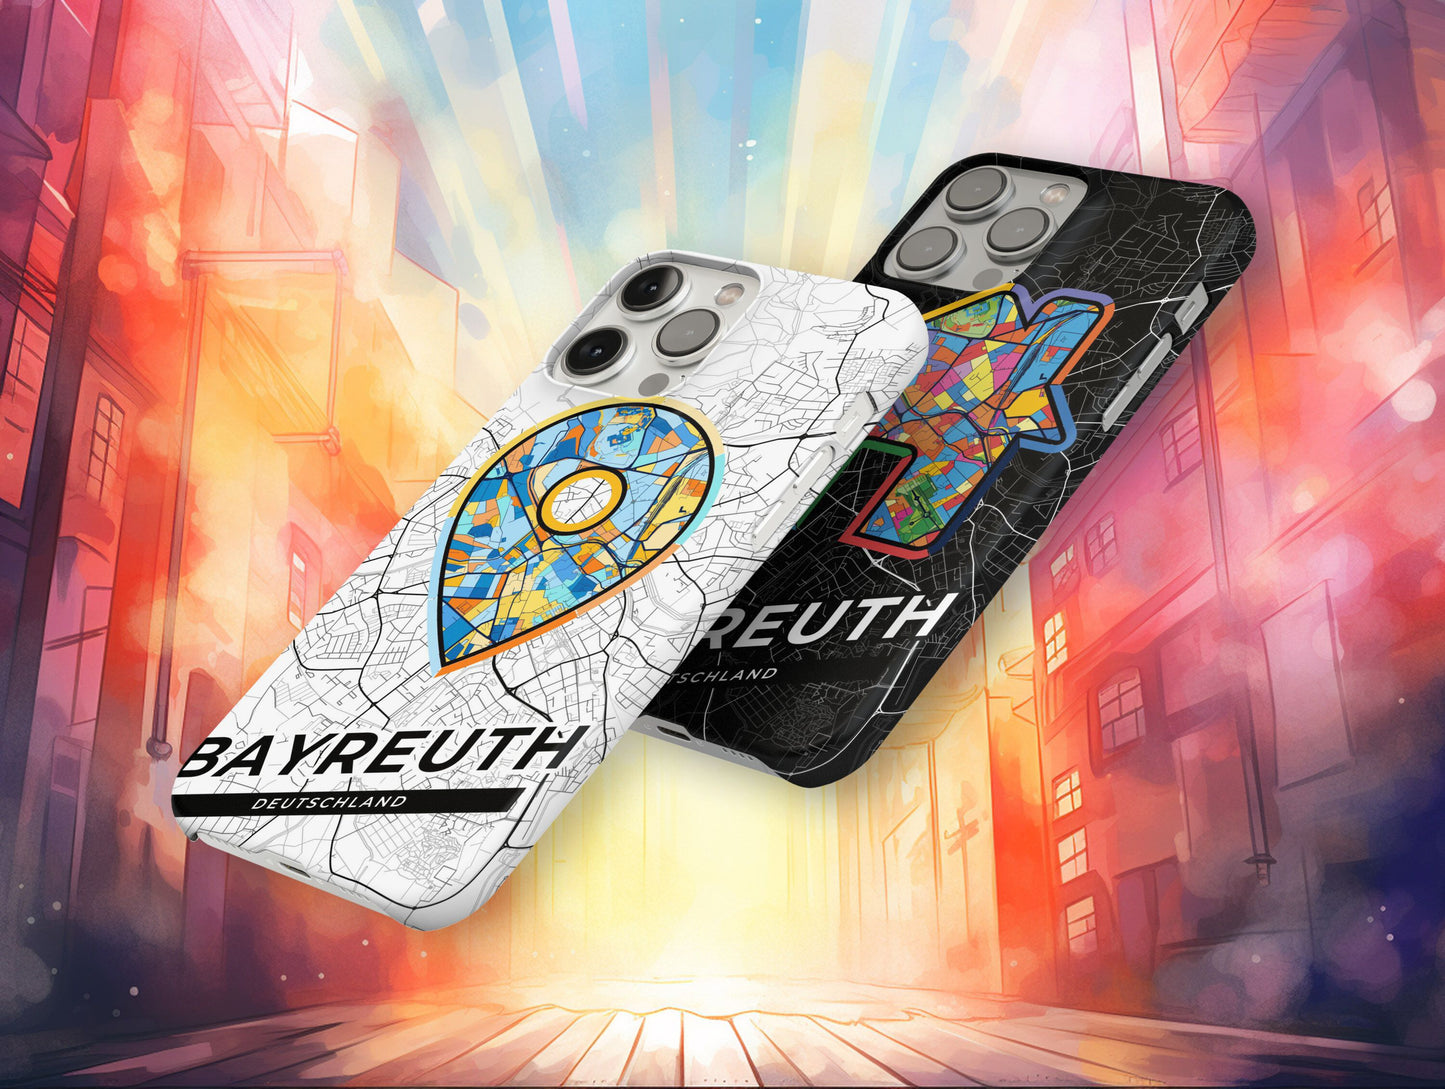 Bayreuth Deutschland slim phone case with colorful icon. Birthday, wedding or housewarming gift. Couple match cases.